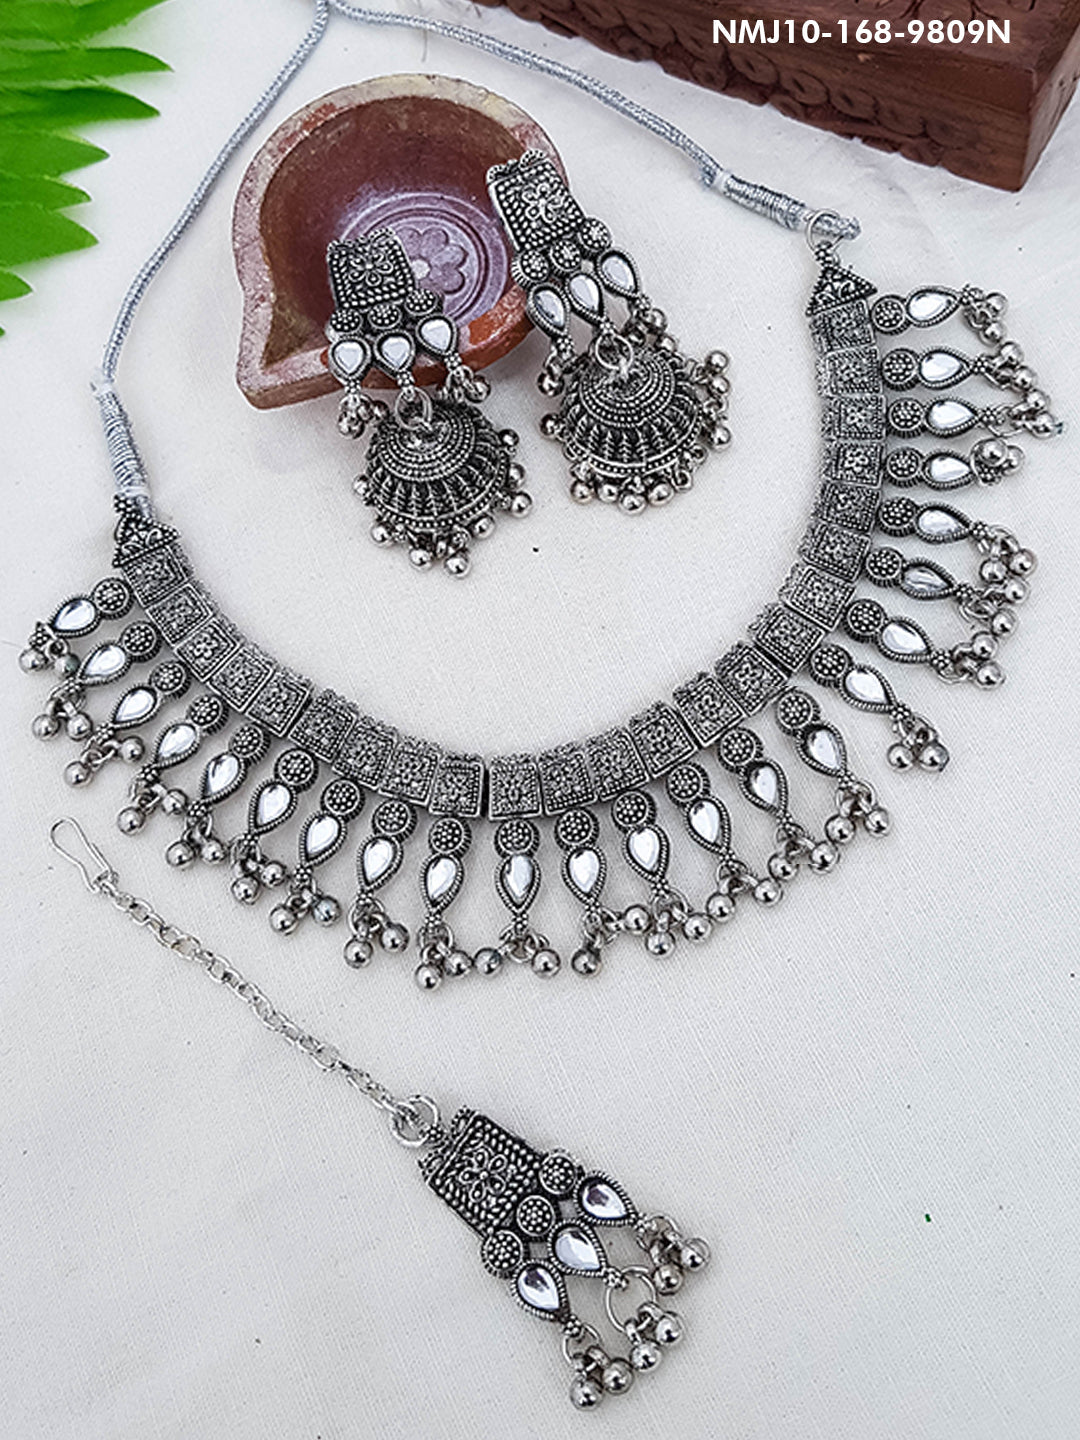 Silver Oxidised Exclusive Designer Necklace Set for special occasion 9809N